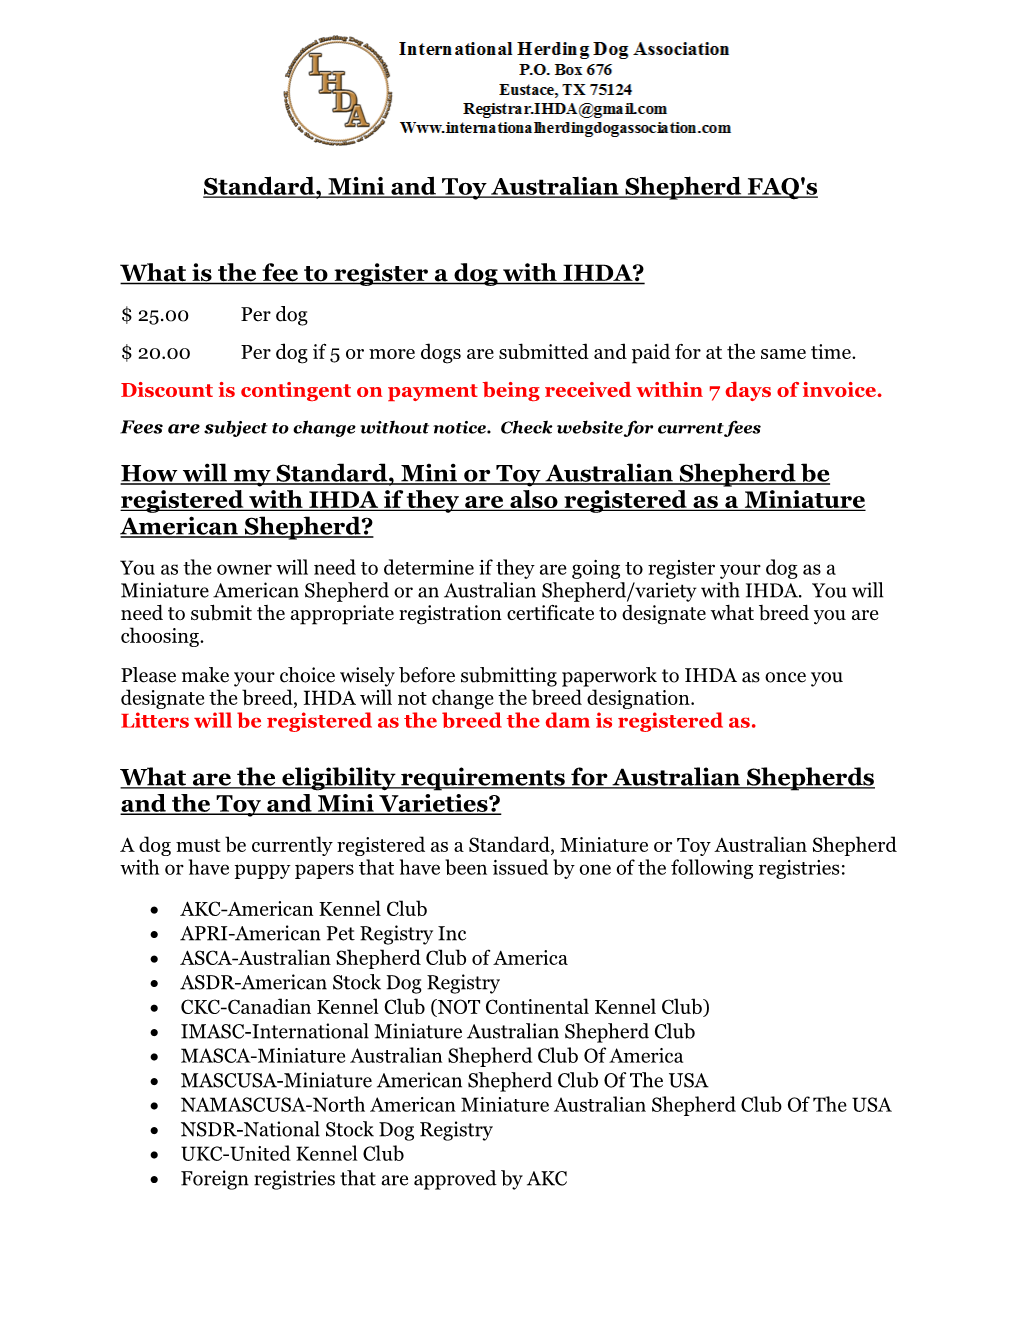 Standard, Mini and Toy Australian Shepherd FAQ's What Is the Fee to Register a Dog with IHDA?